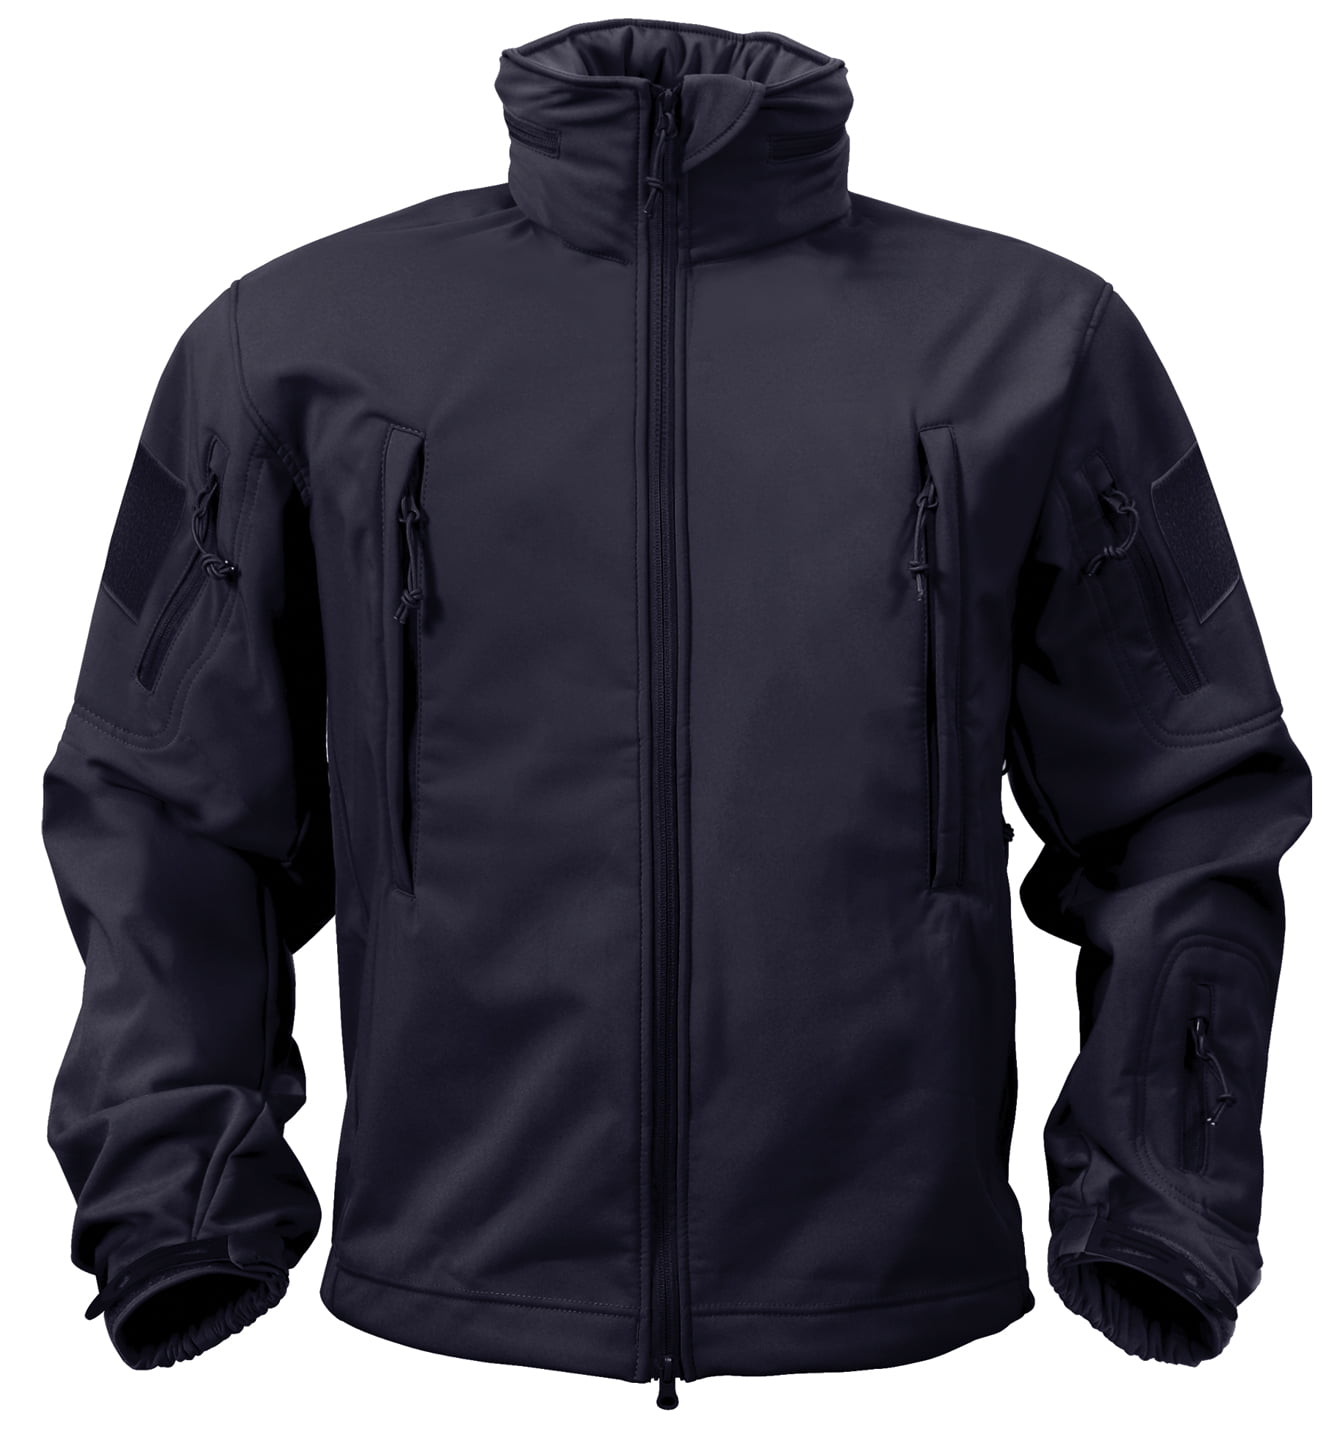 Rothco Special Ops Tactical Softshell Jacket 